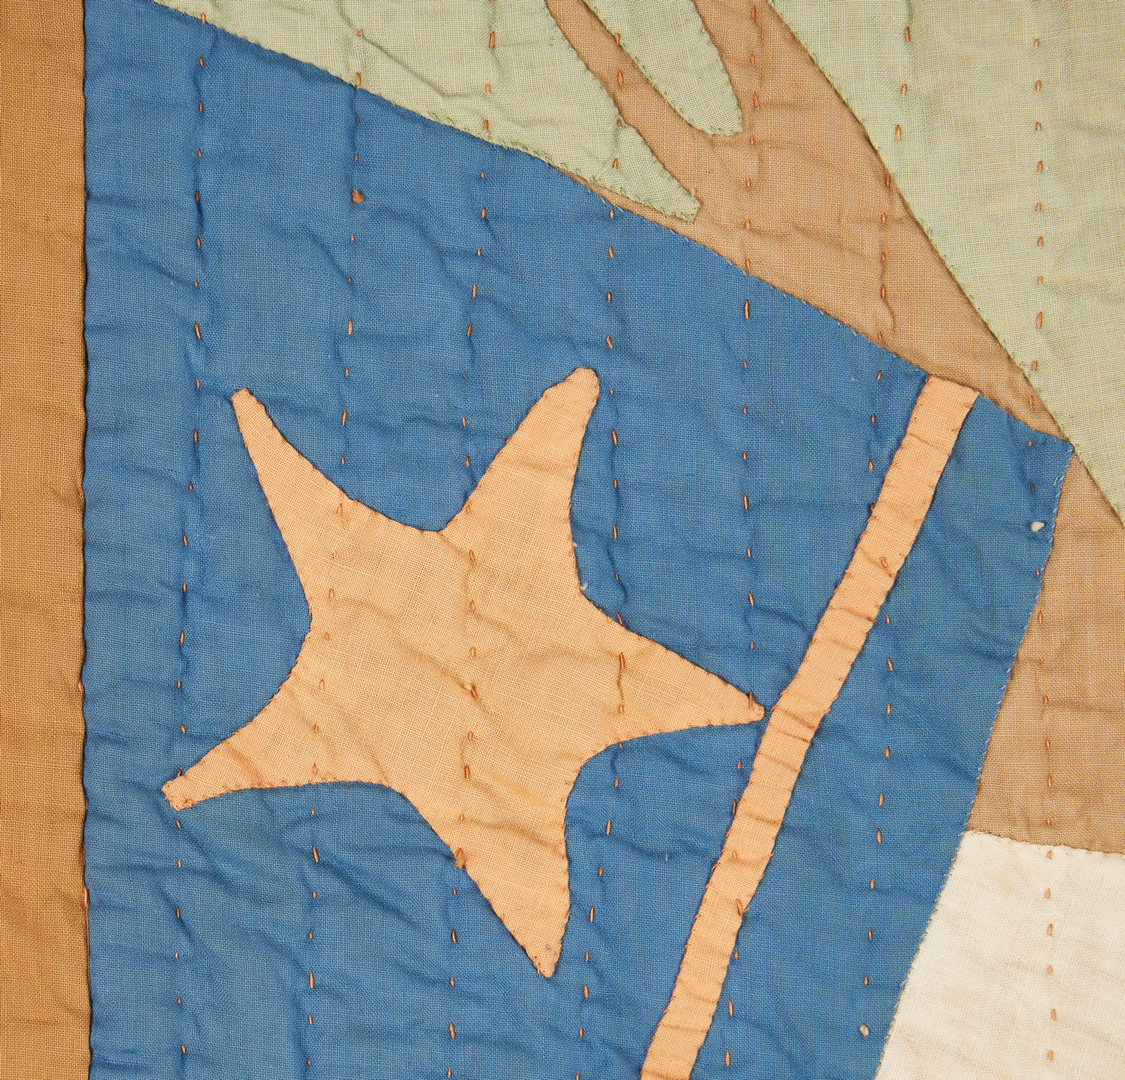 Lot 154: Important "TVA" Quilt, designed by Ruth Clement Bond